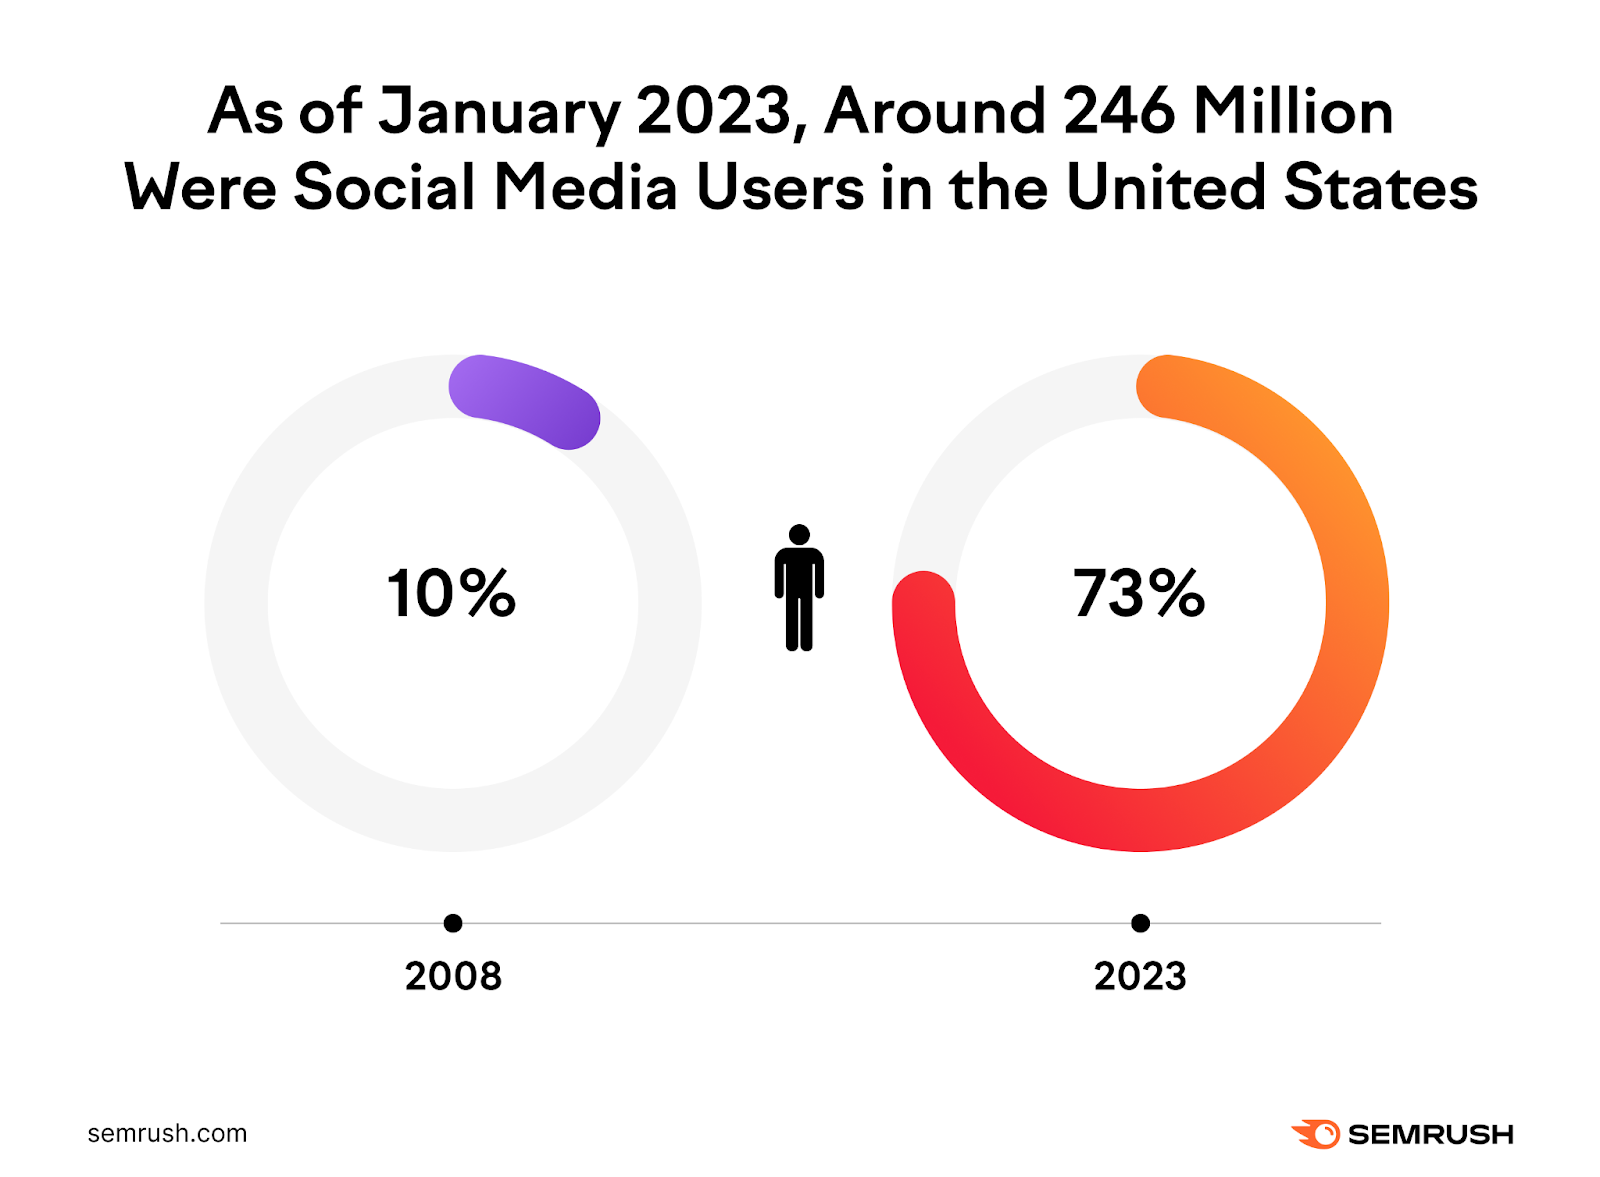 Statista's study results show that as of January 2023, around 246 million were social media users in US